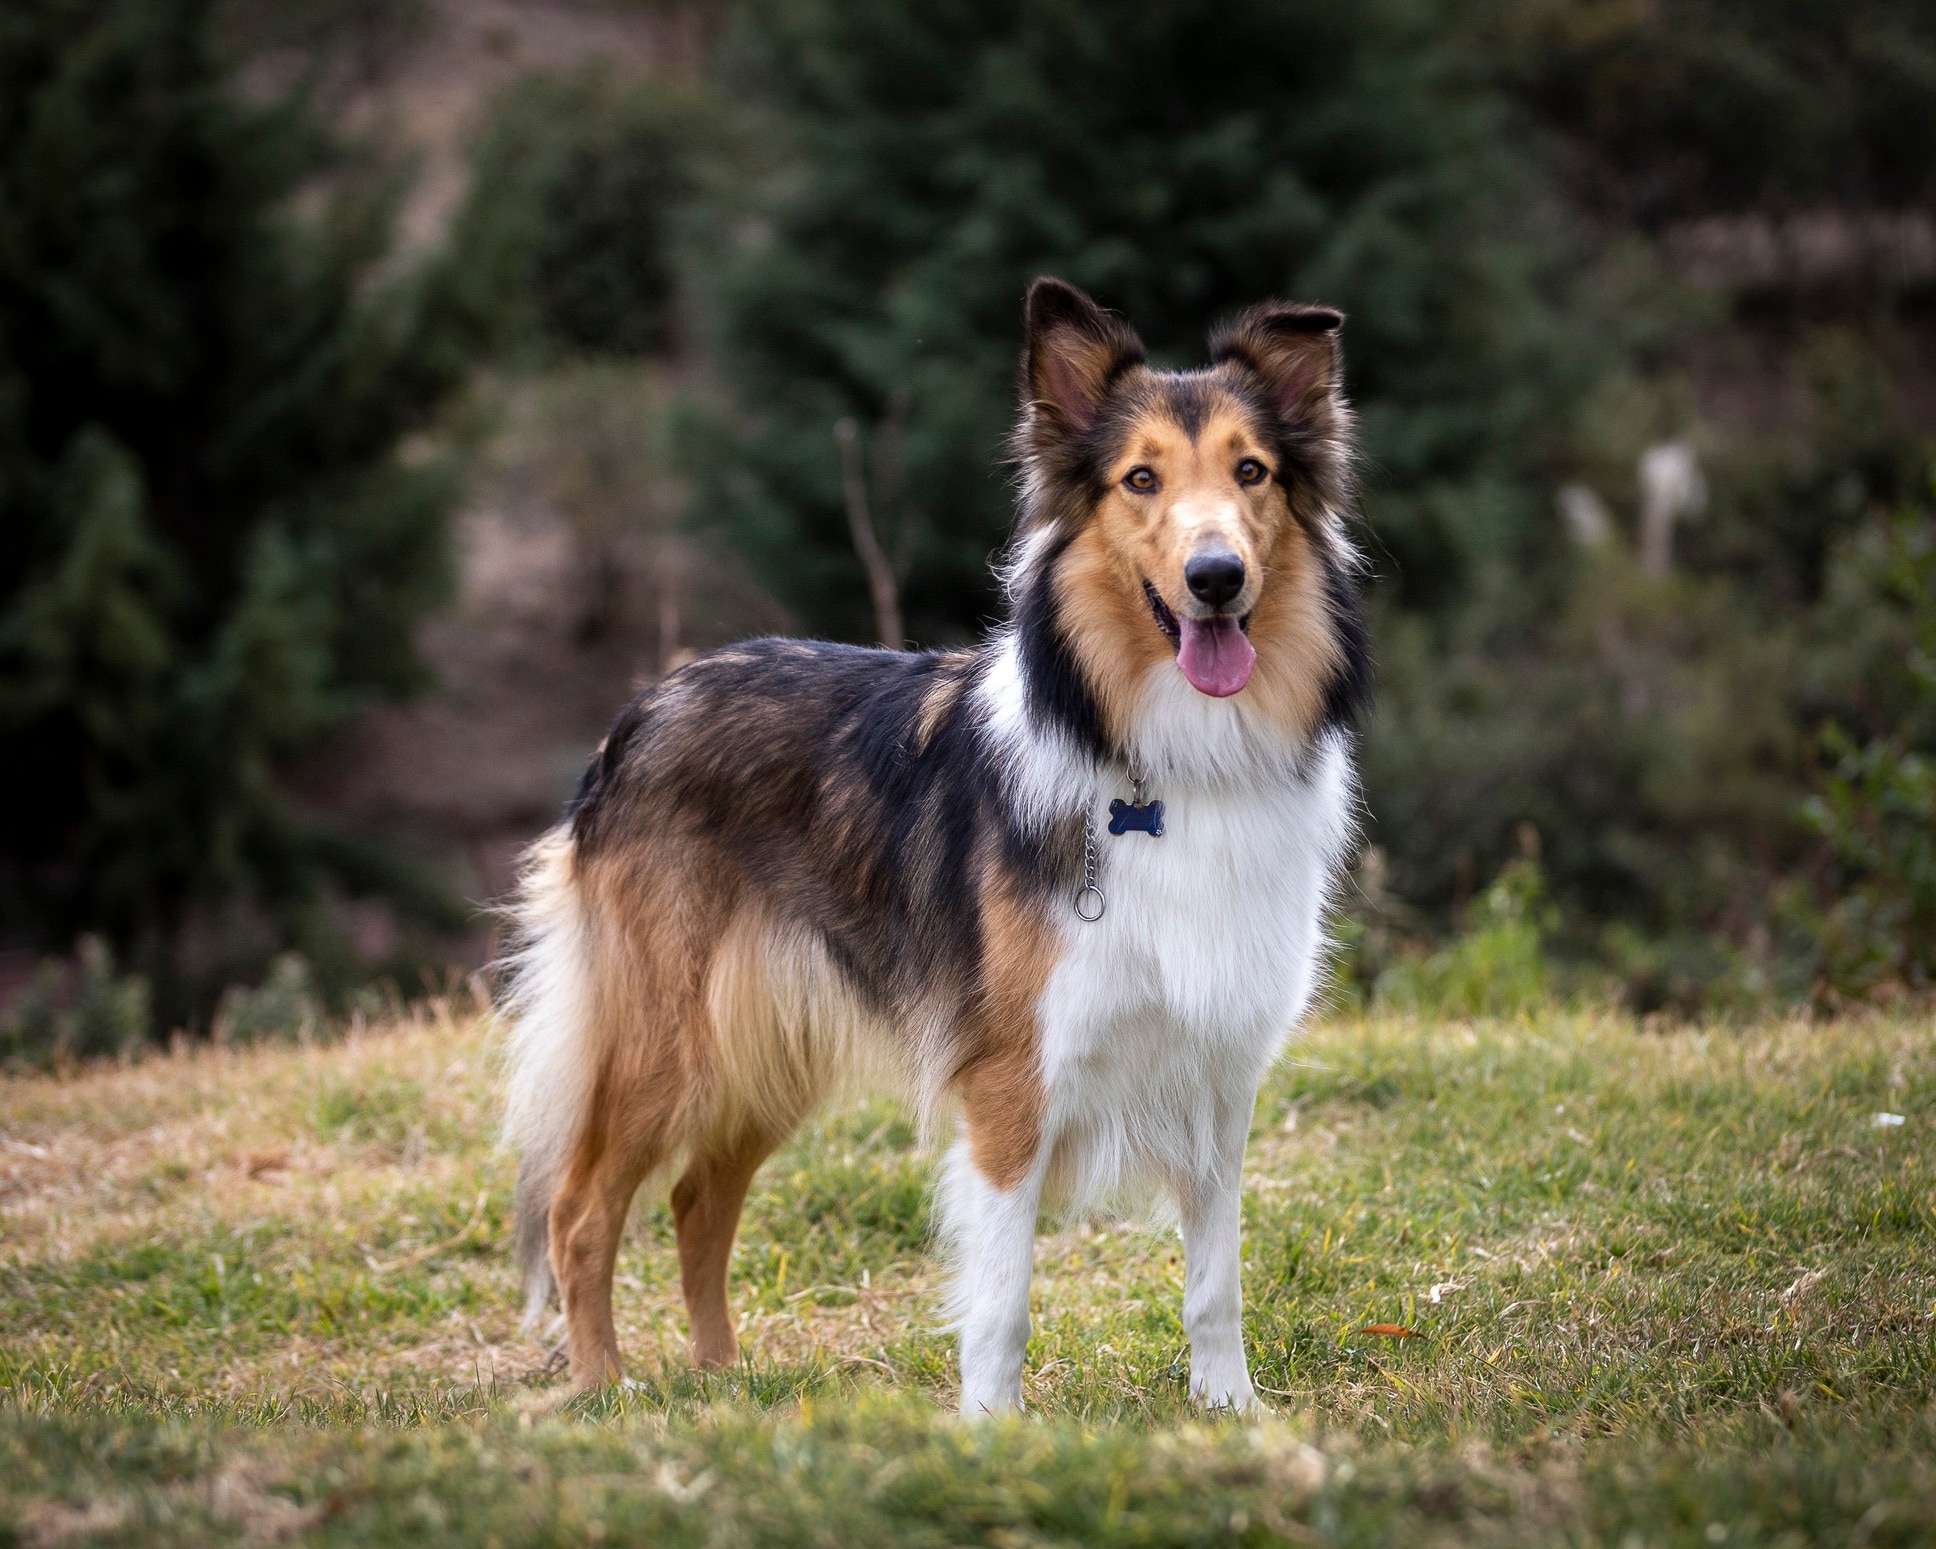 tricolor rough collie standing and looking at the camera outside